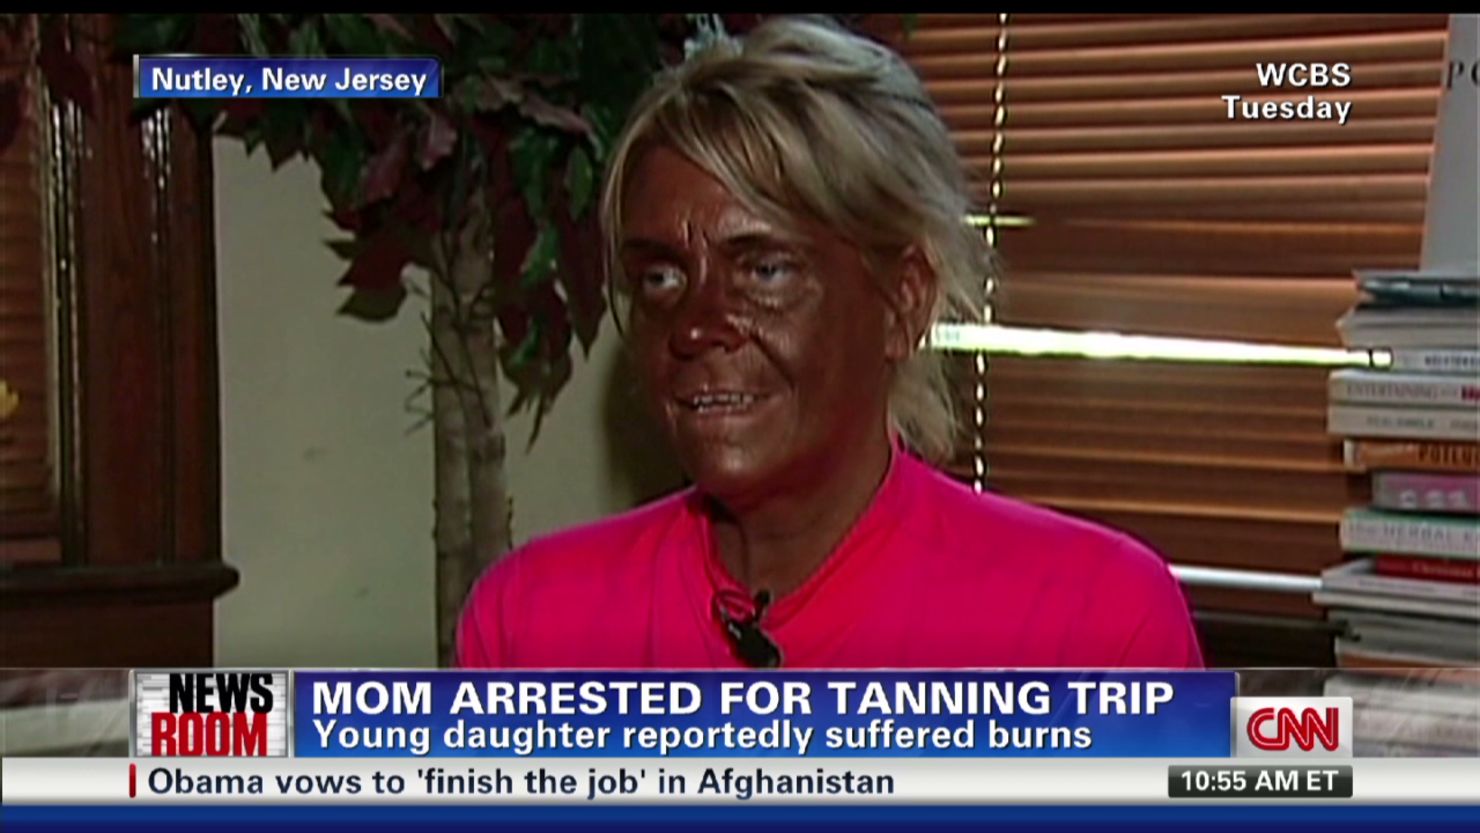 A New Jersey grand jury declined to indict Patricia Krentcil for allegedly allowing her 5-year-old daughter to use a tanning bed.